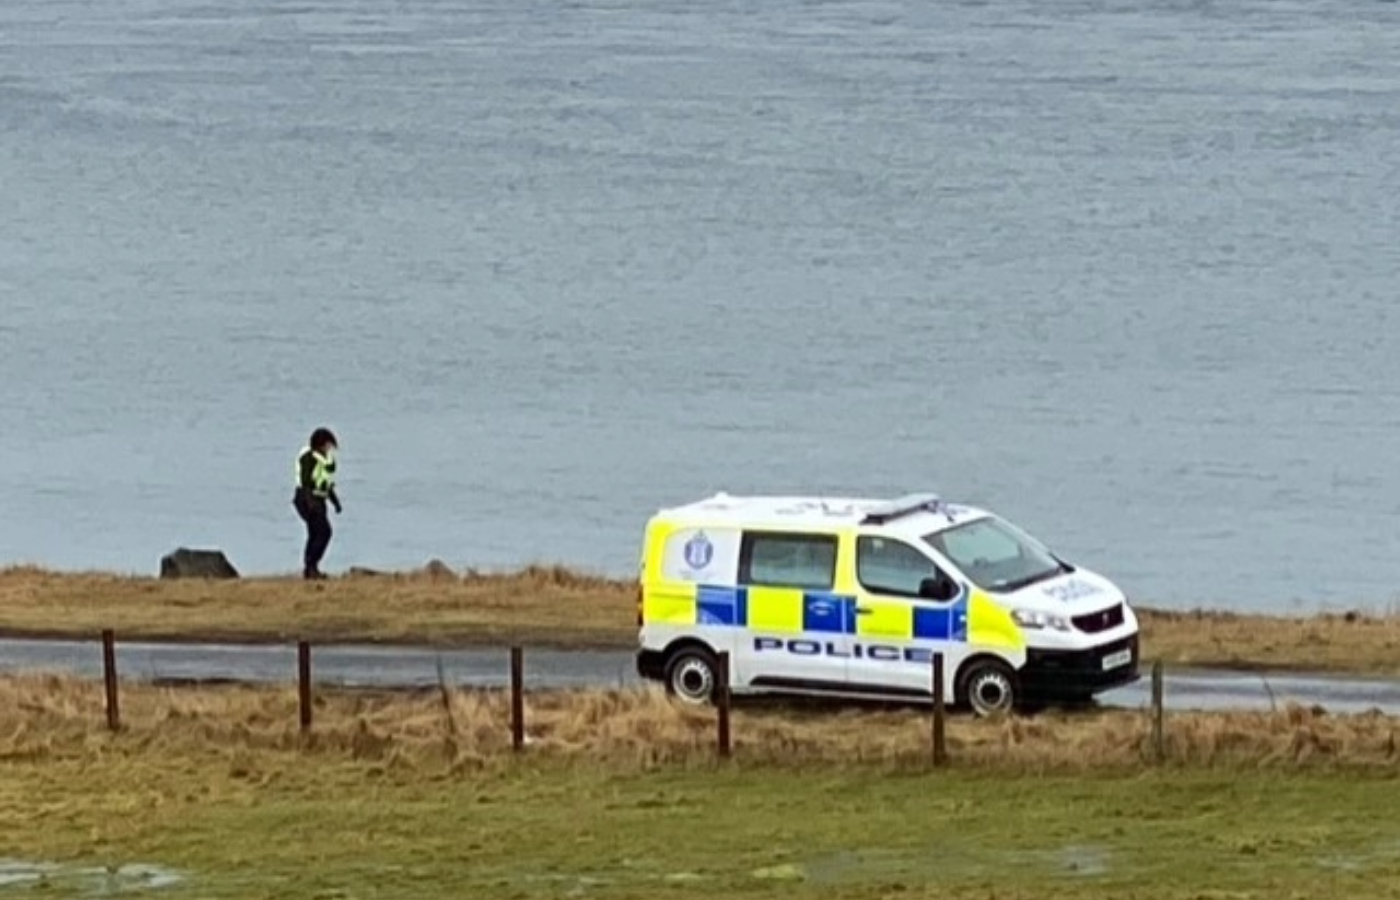 A large police presence remains in the area on the island. Photo: STV News.